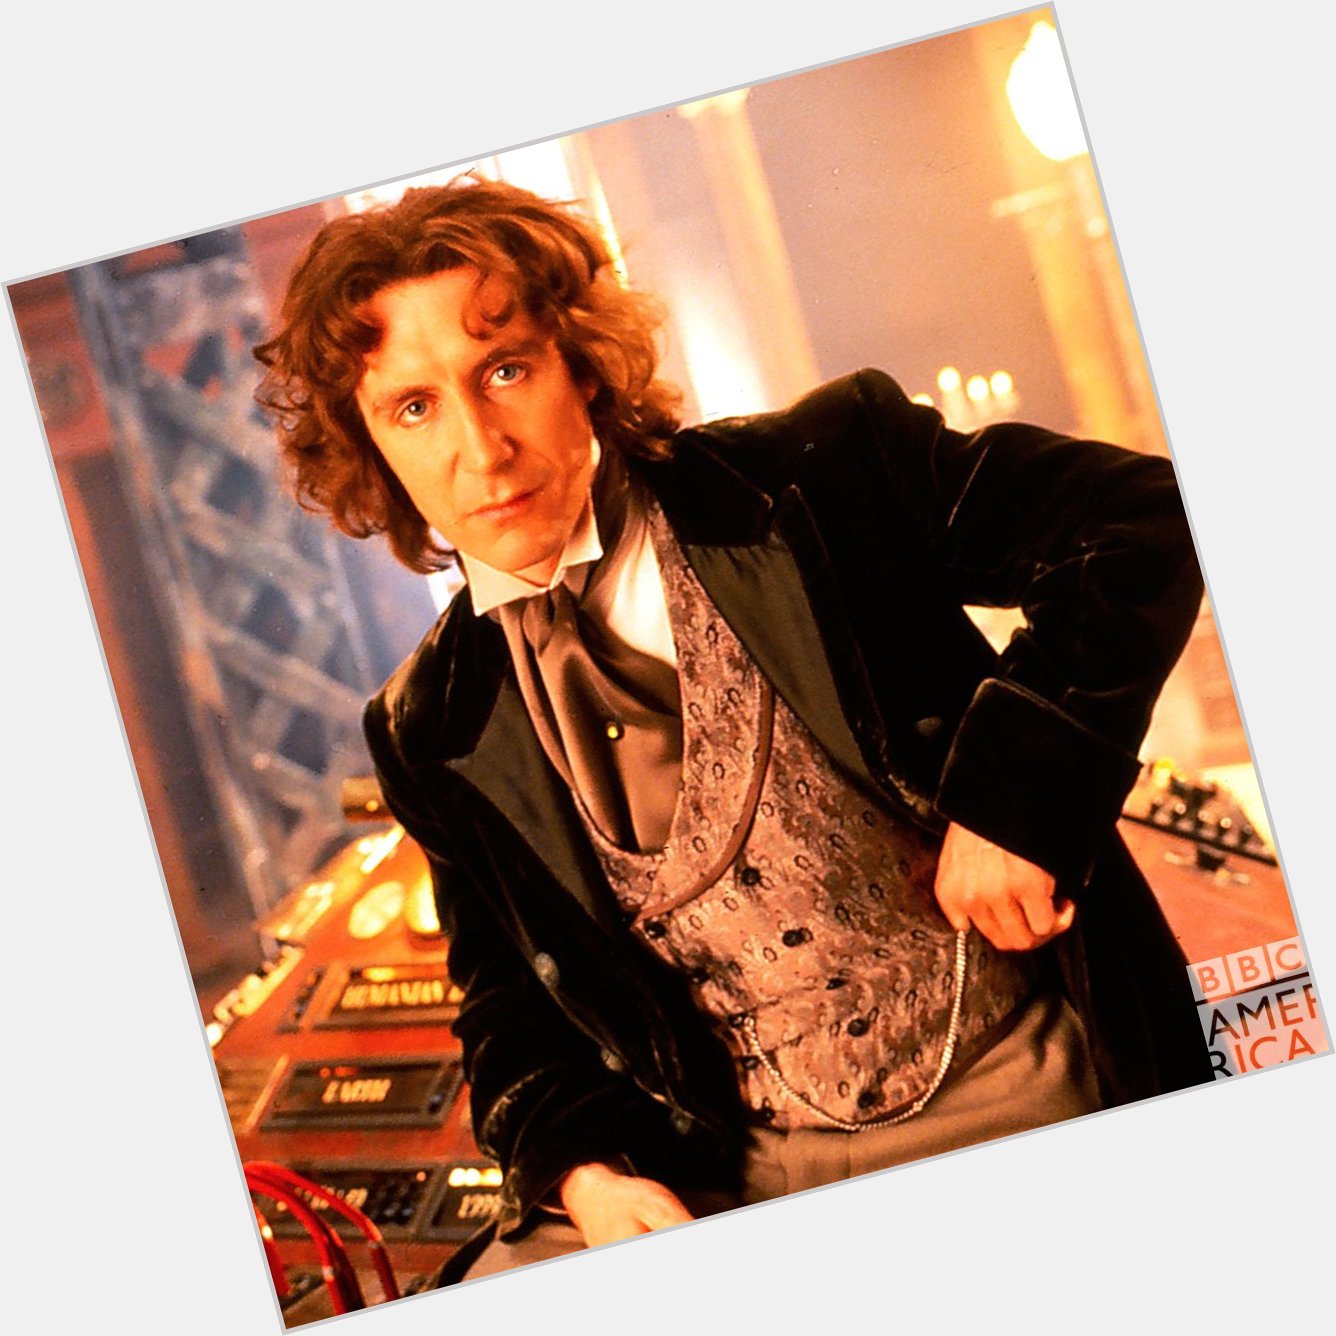 Speaking of the Eighth Doctor, happy birthday to Paul McGann!  